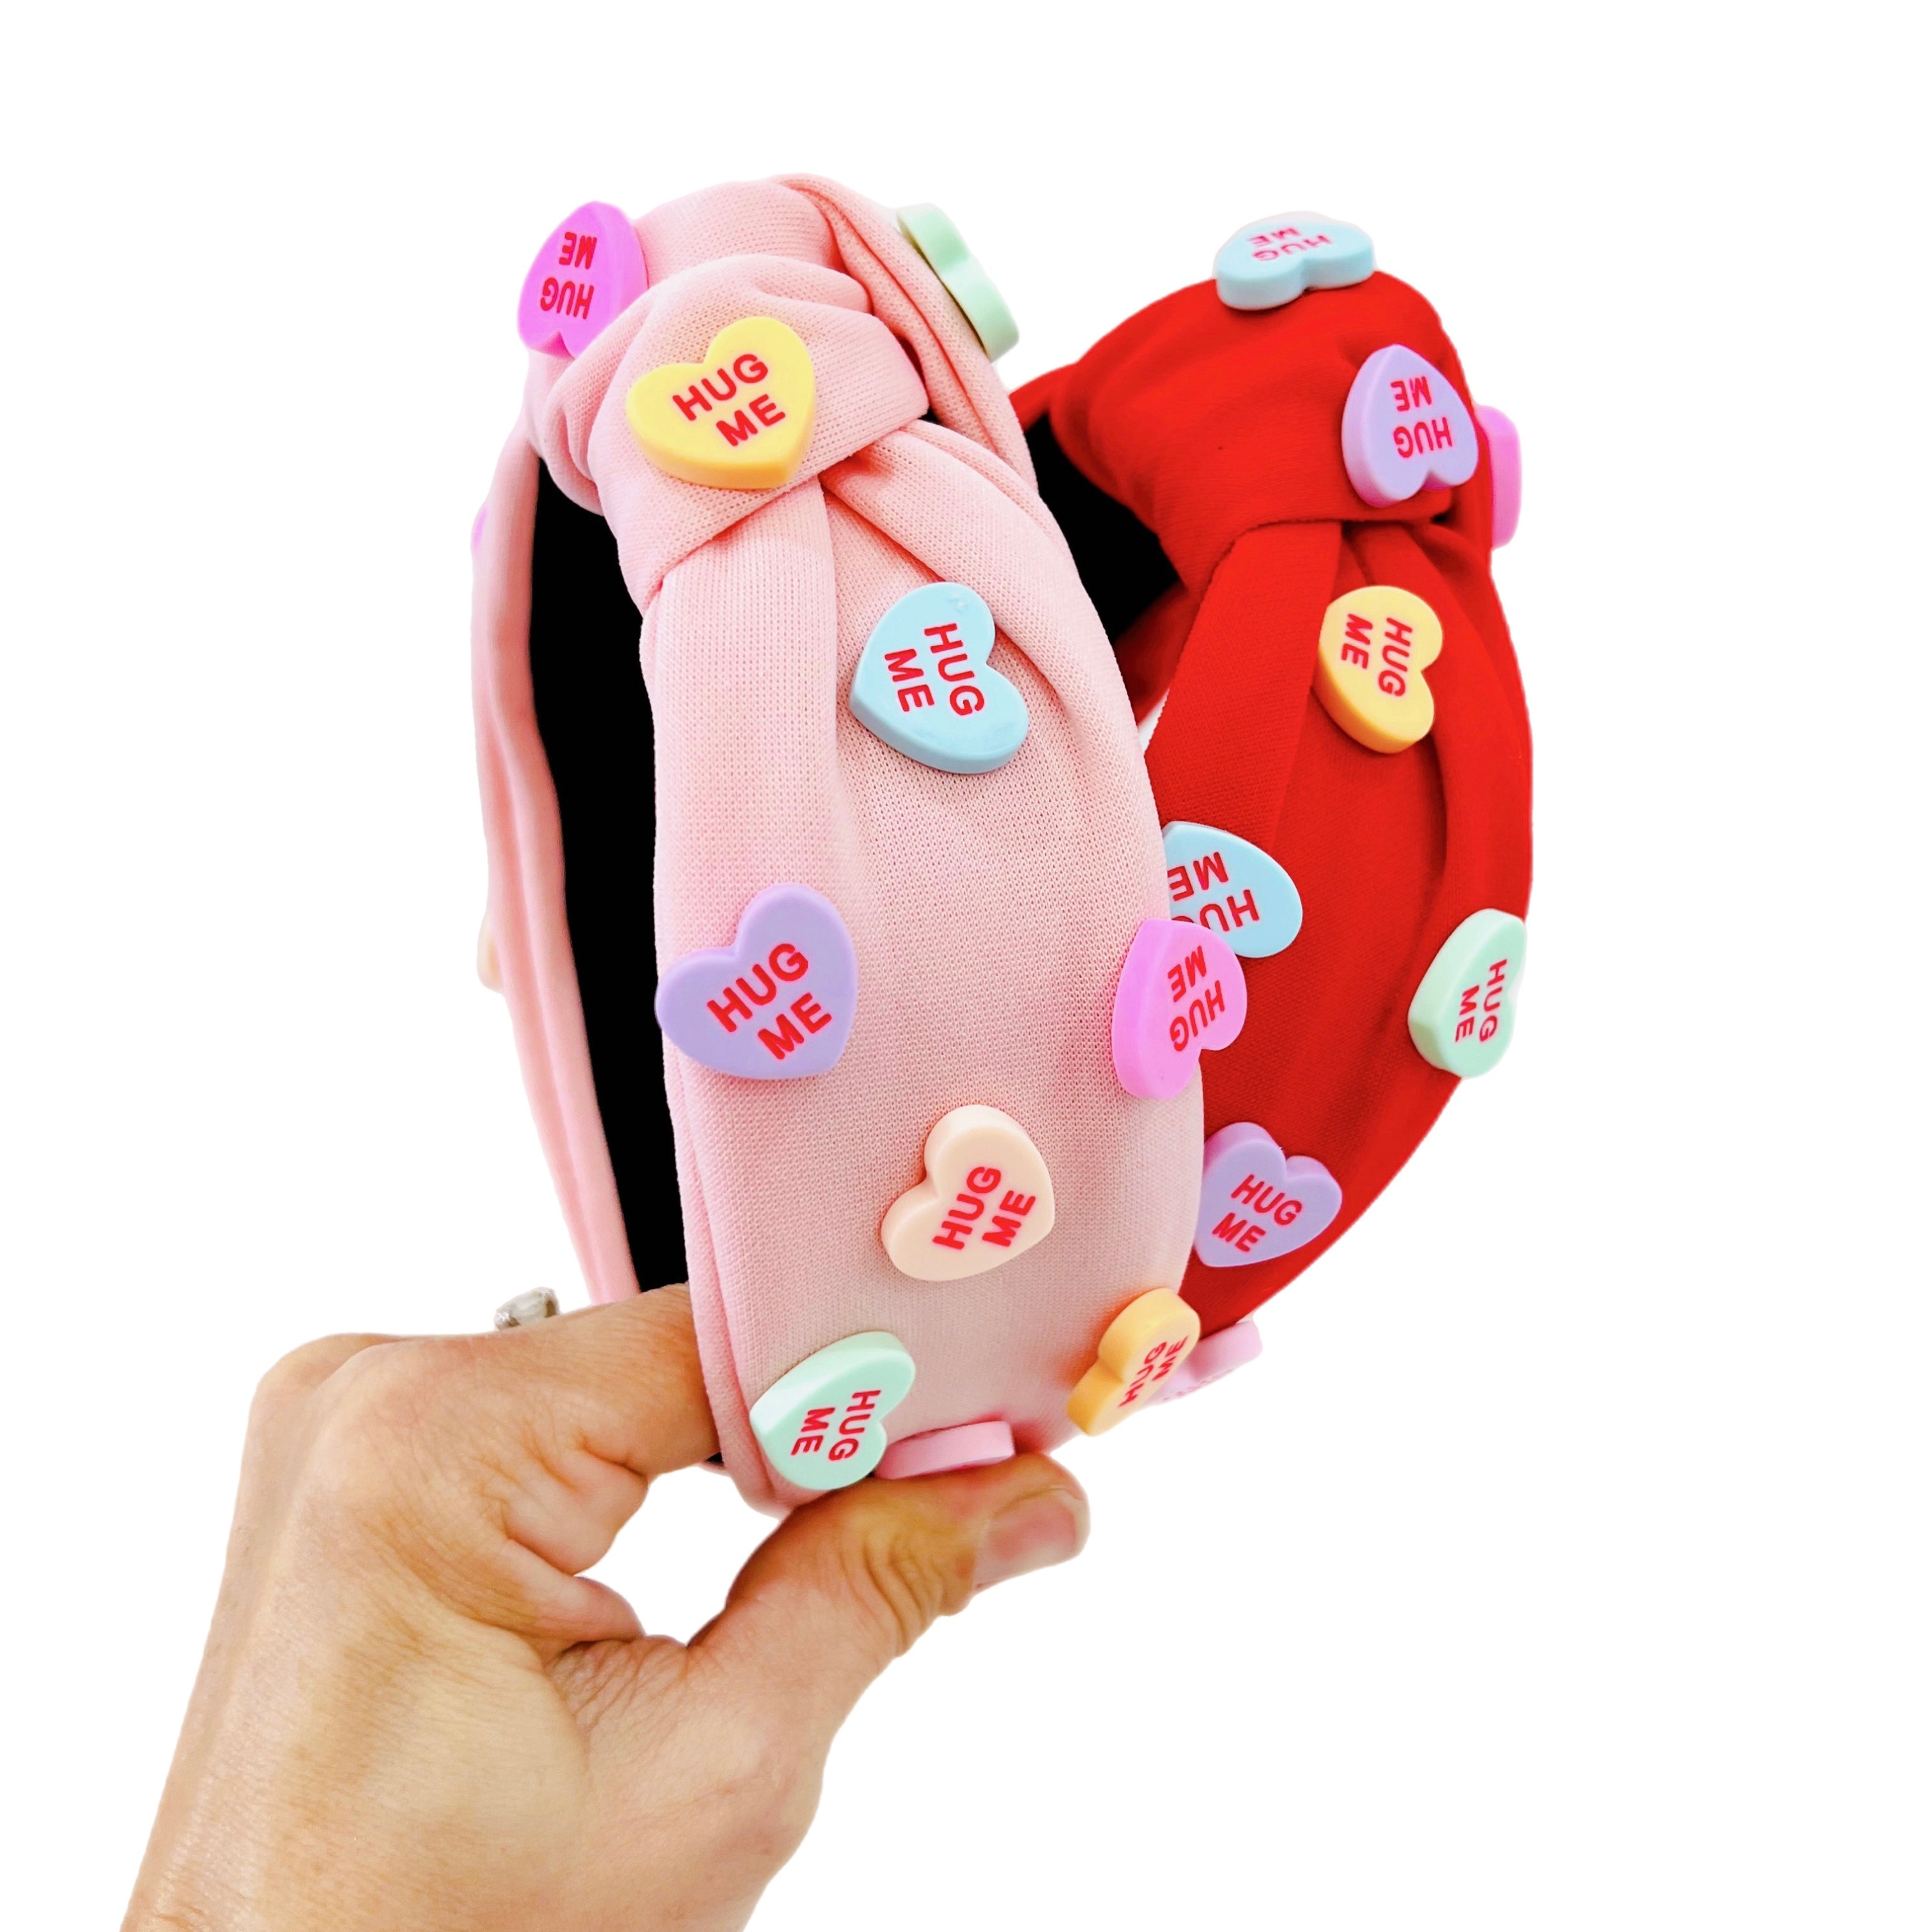 Prep Obsessed Candy Heart Headband Red